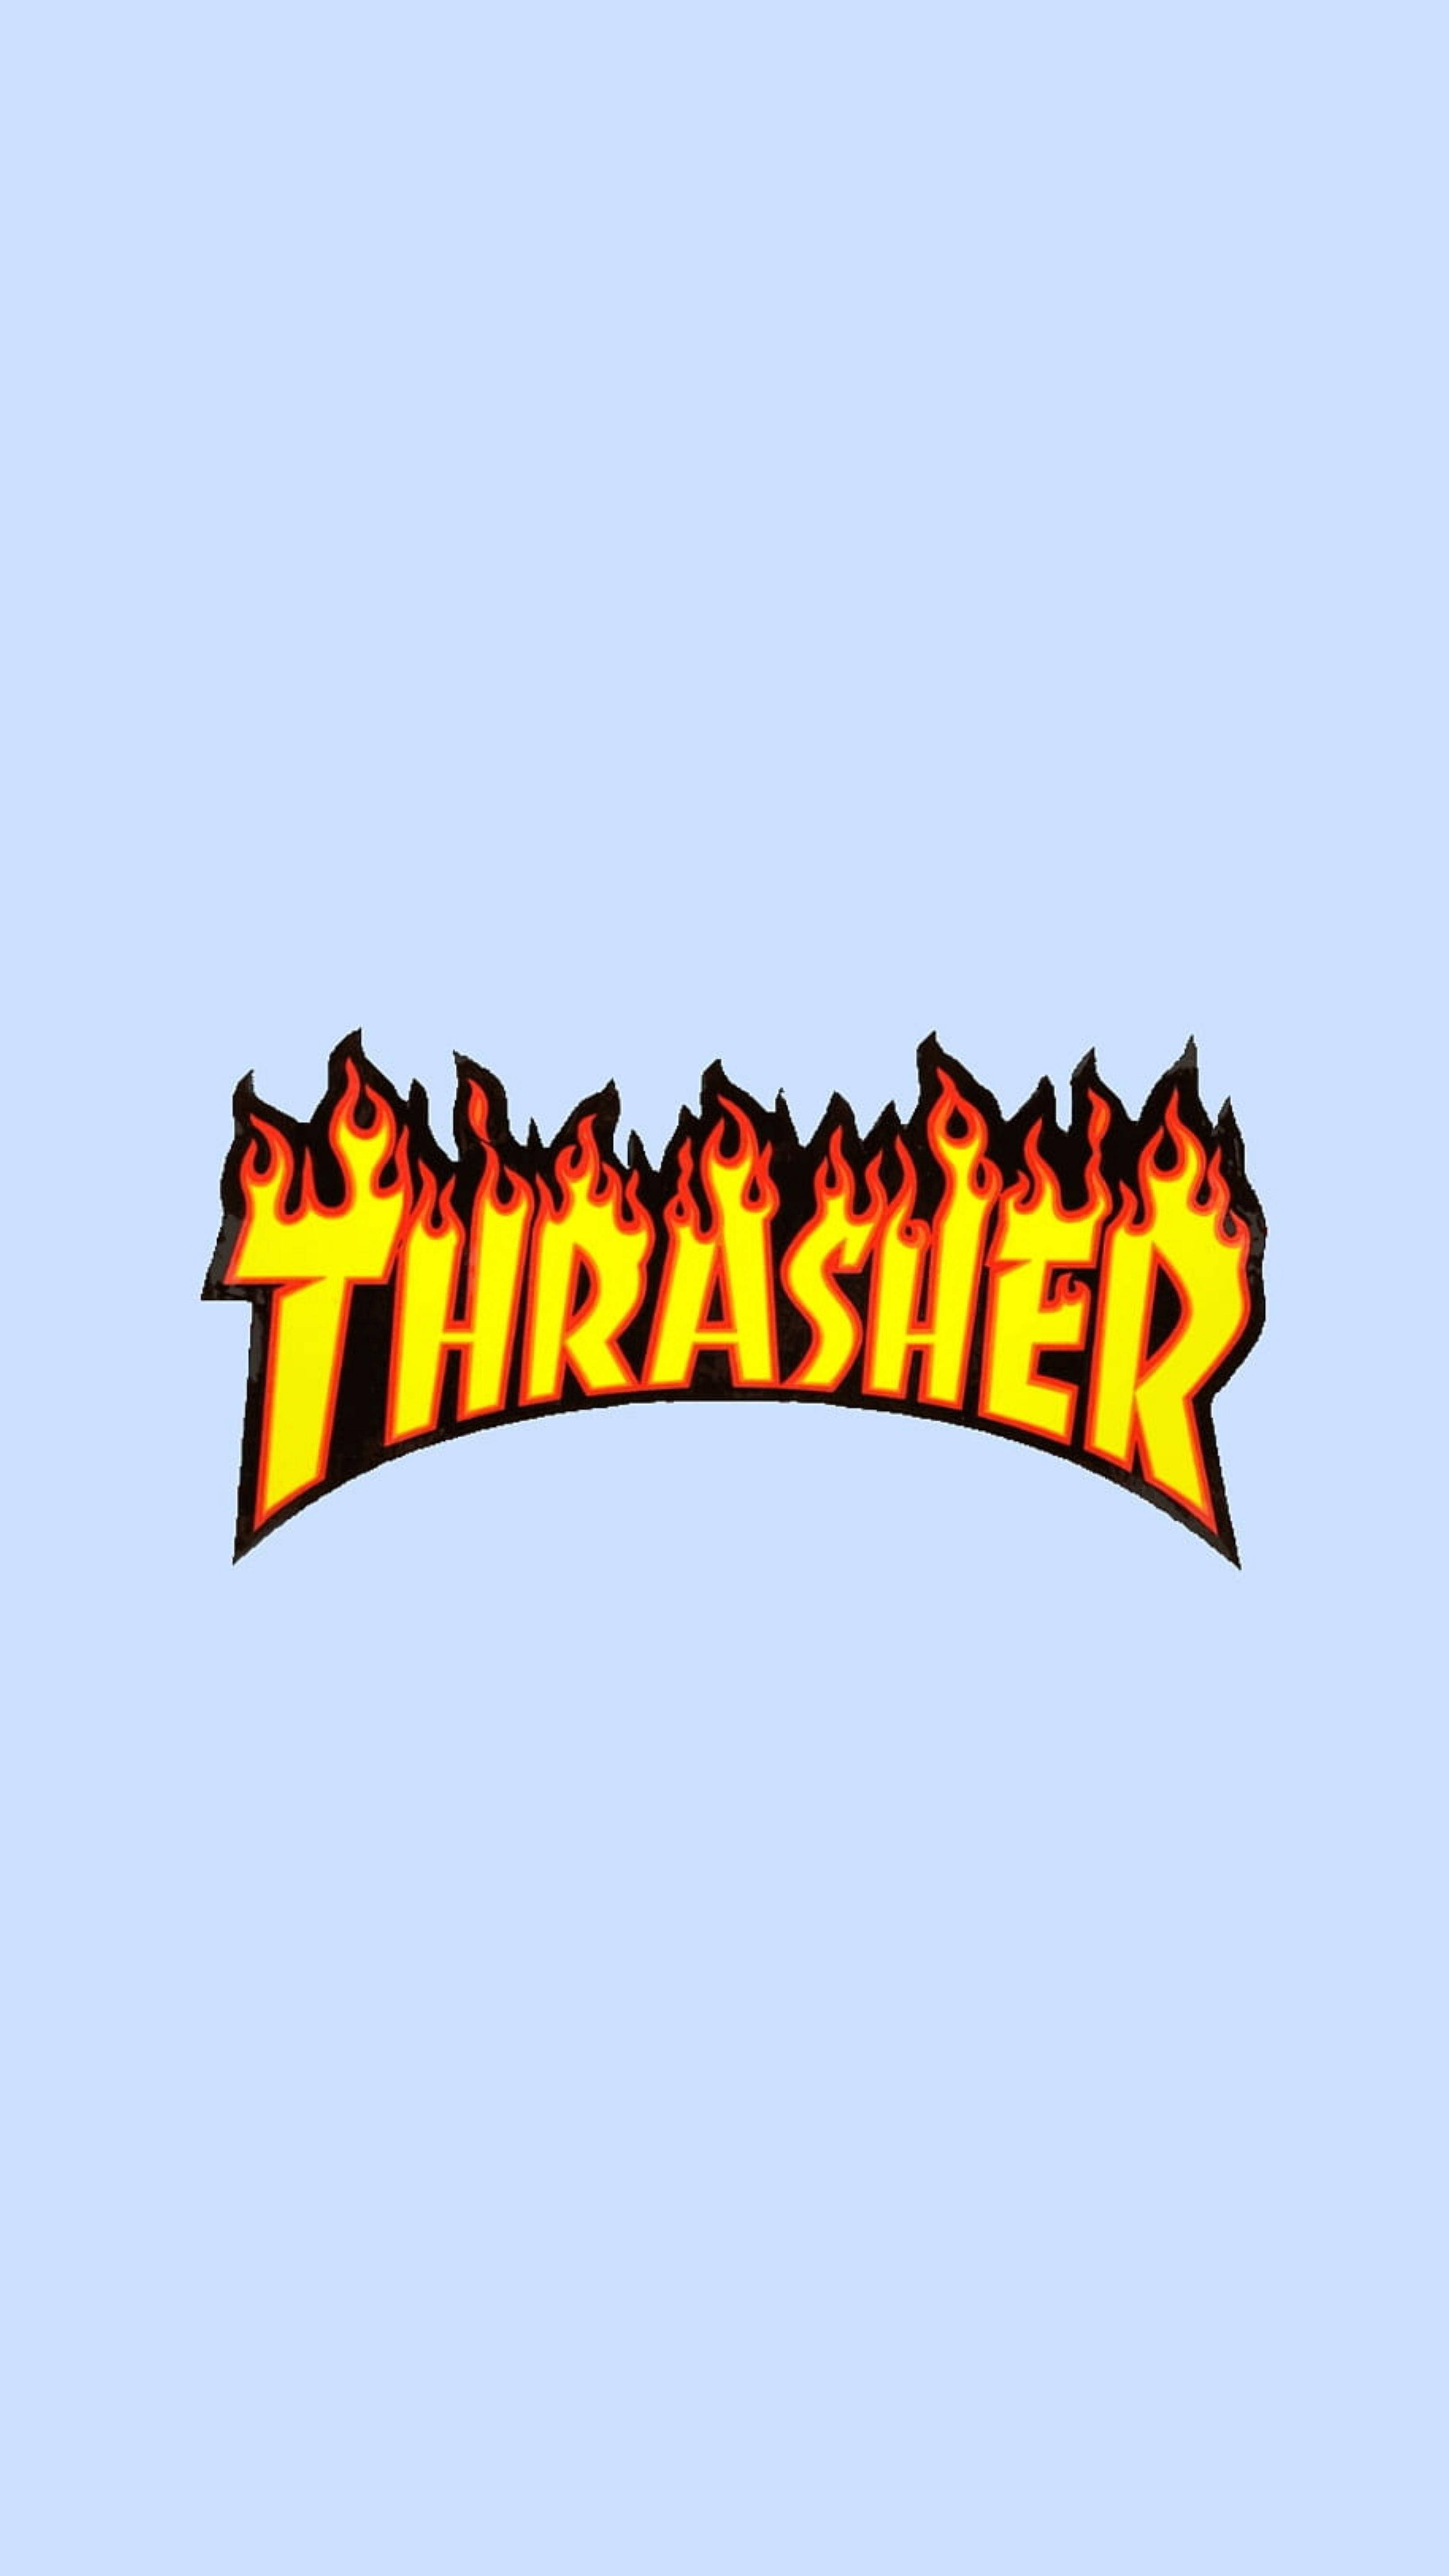 Download Thrasher On Blue Wallpaper Wallpapers Com